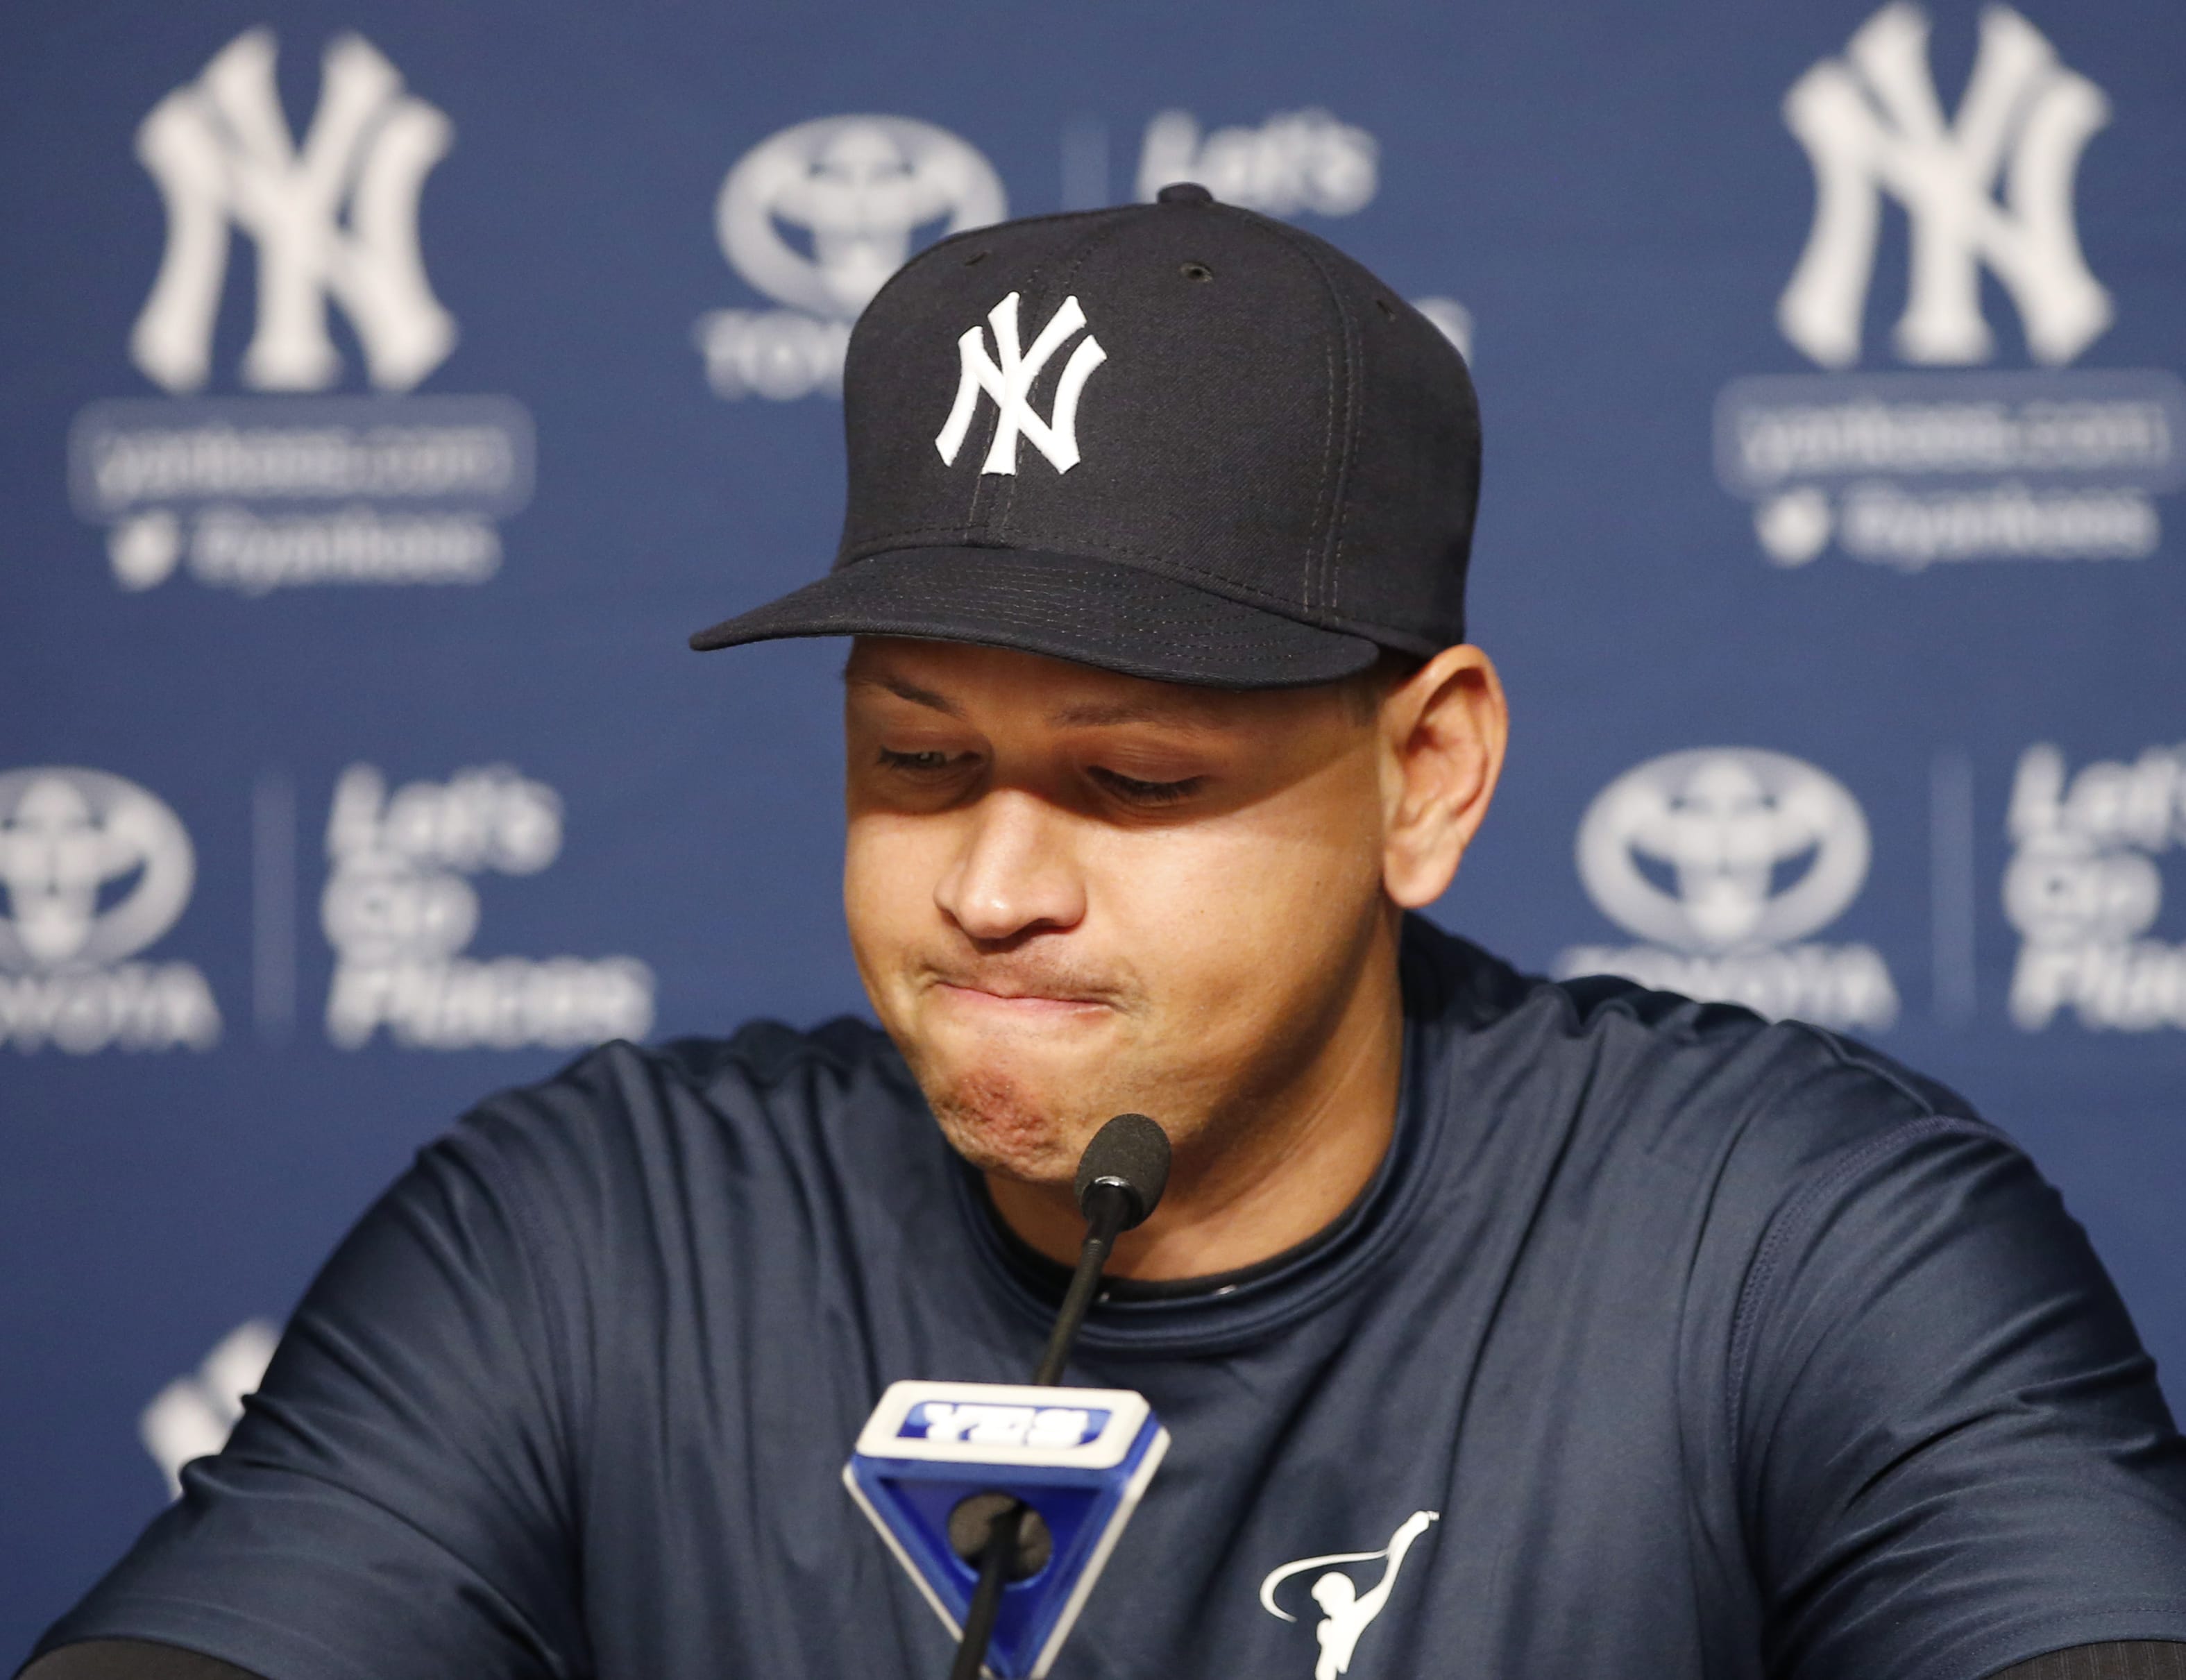 New York Yankees' Alex Rodriguez pauses as he announces that Friday, Aug. 12, 2016, will be his last game as a player during a news conference at Yankee Stadium in New York, Sunday, Aug. 7, 2016. He will continue on in a role as a special advisor and instructor to the team through Dec. 31, 2017.